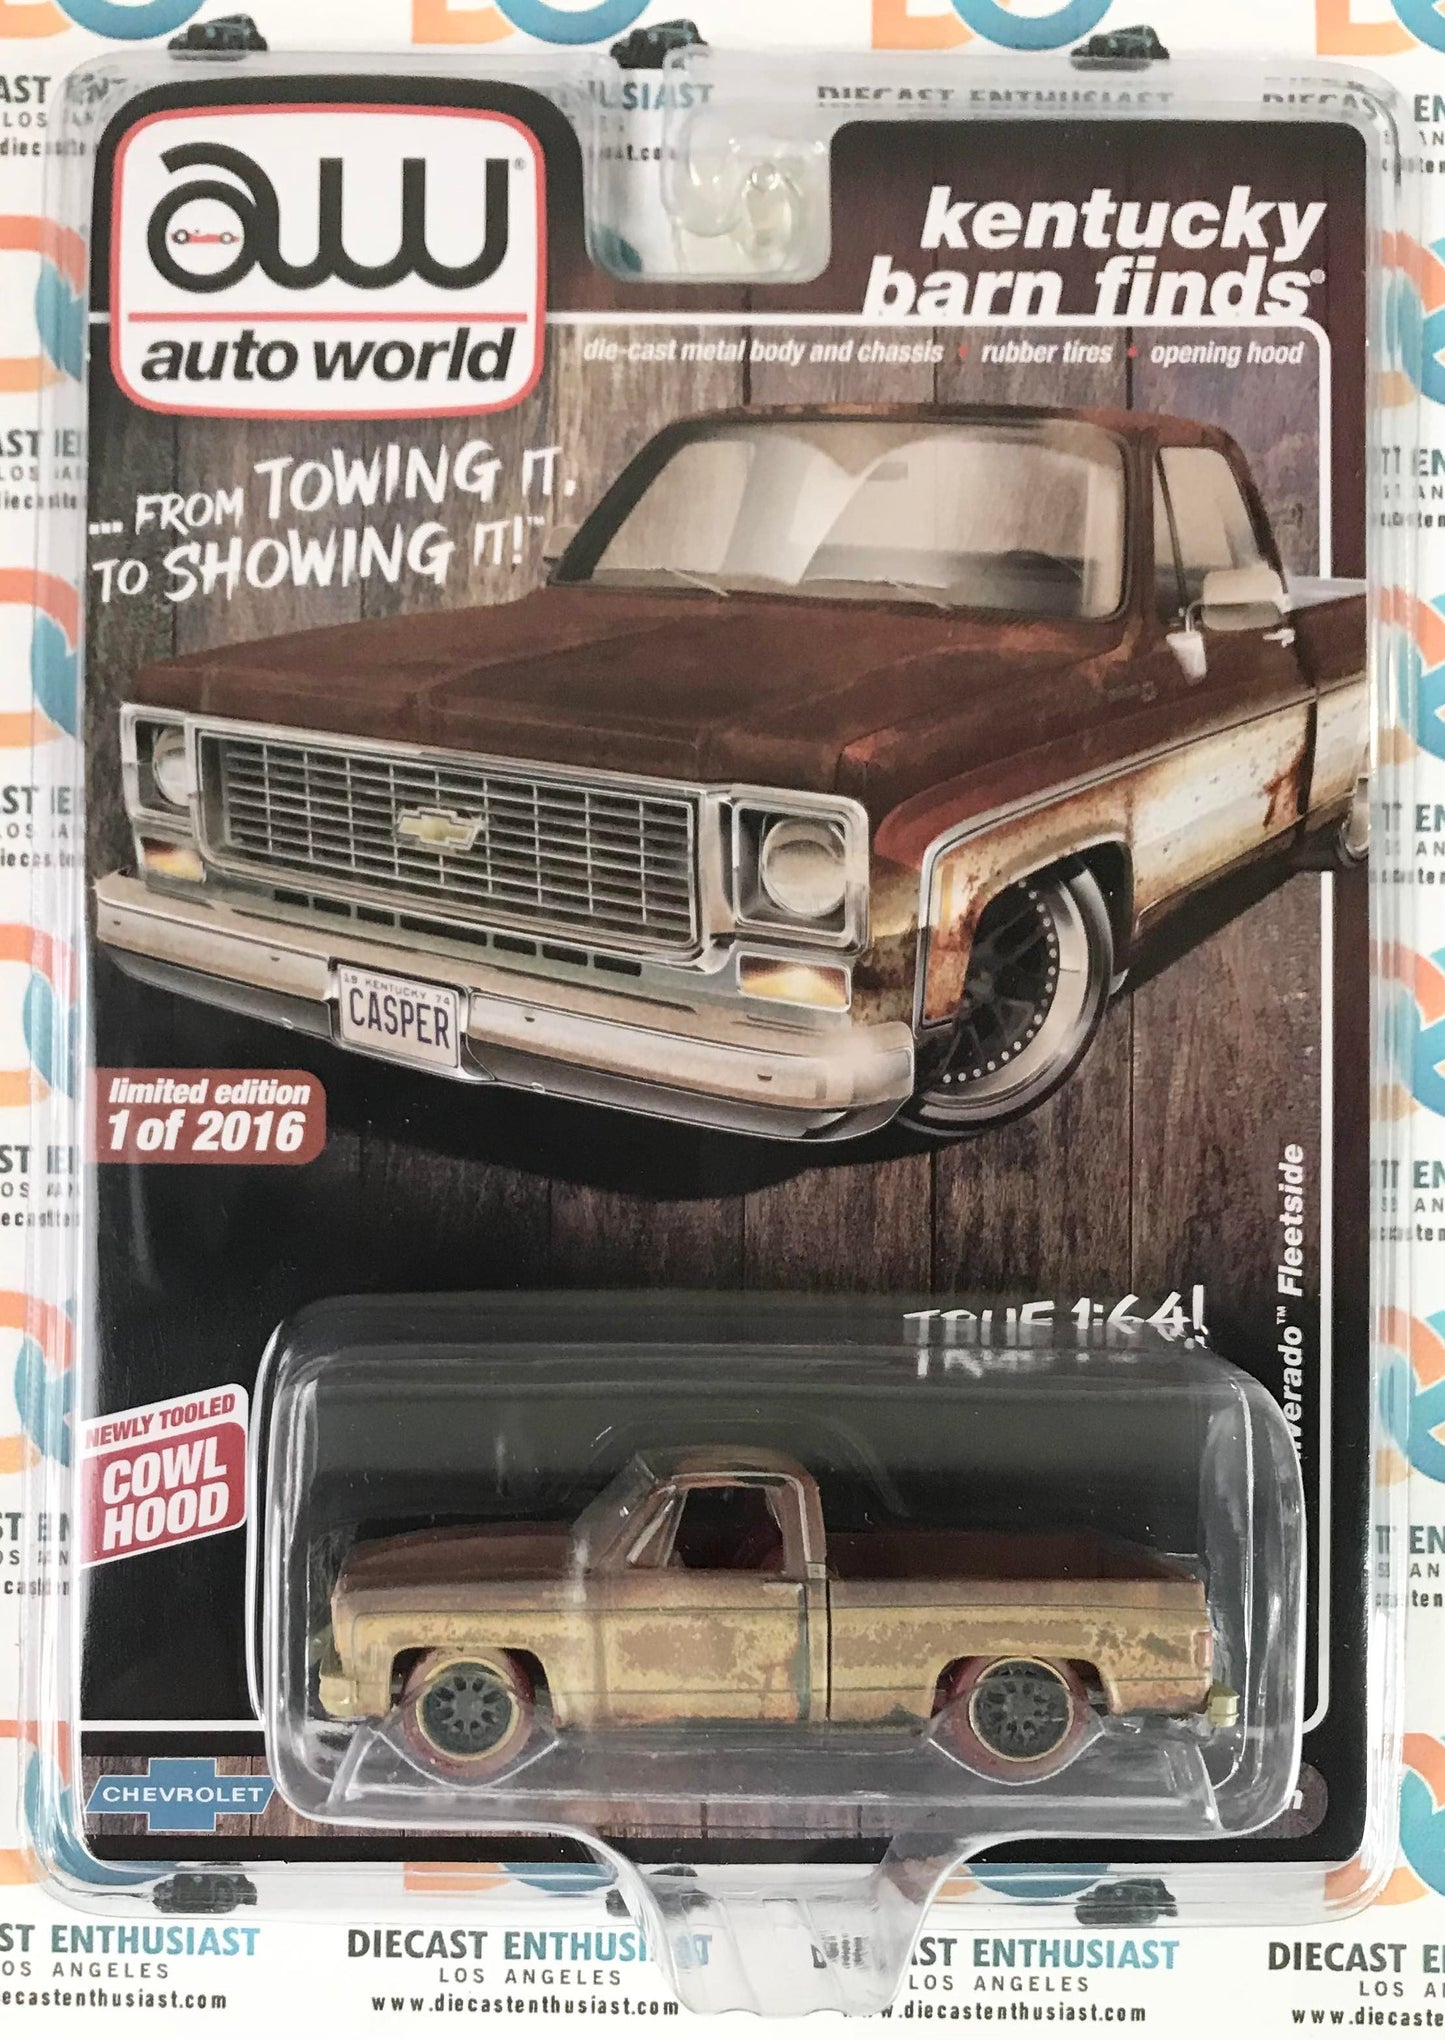 CHASE Auto World Exclusives Kentucky Barn Finds 1974 Chevy Silverado Fleetside Weathered Version 1:64